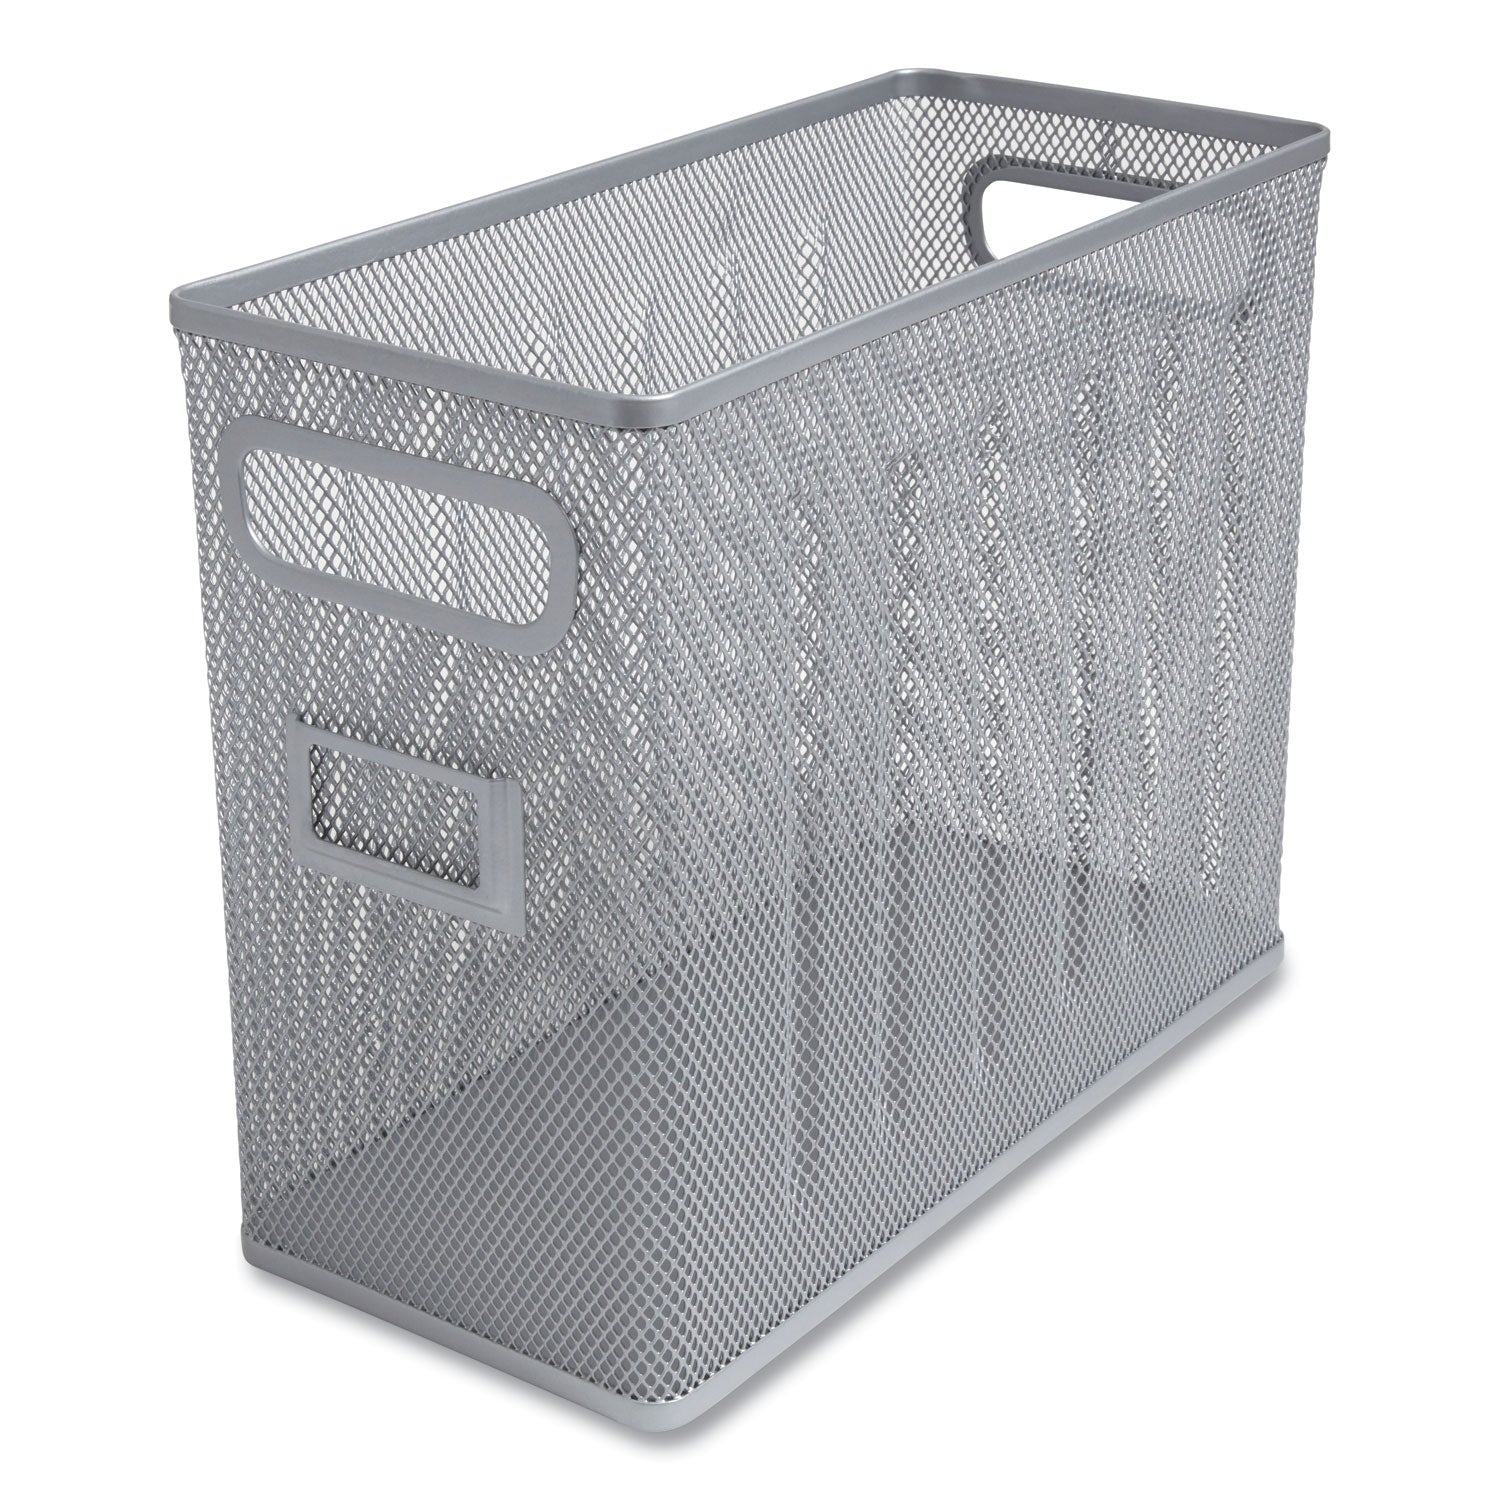 wire-mesh-box-style-vertical-document-organizer-1-section-letter-size-579-x-124-x-1016-silver_tud24402455 - 1